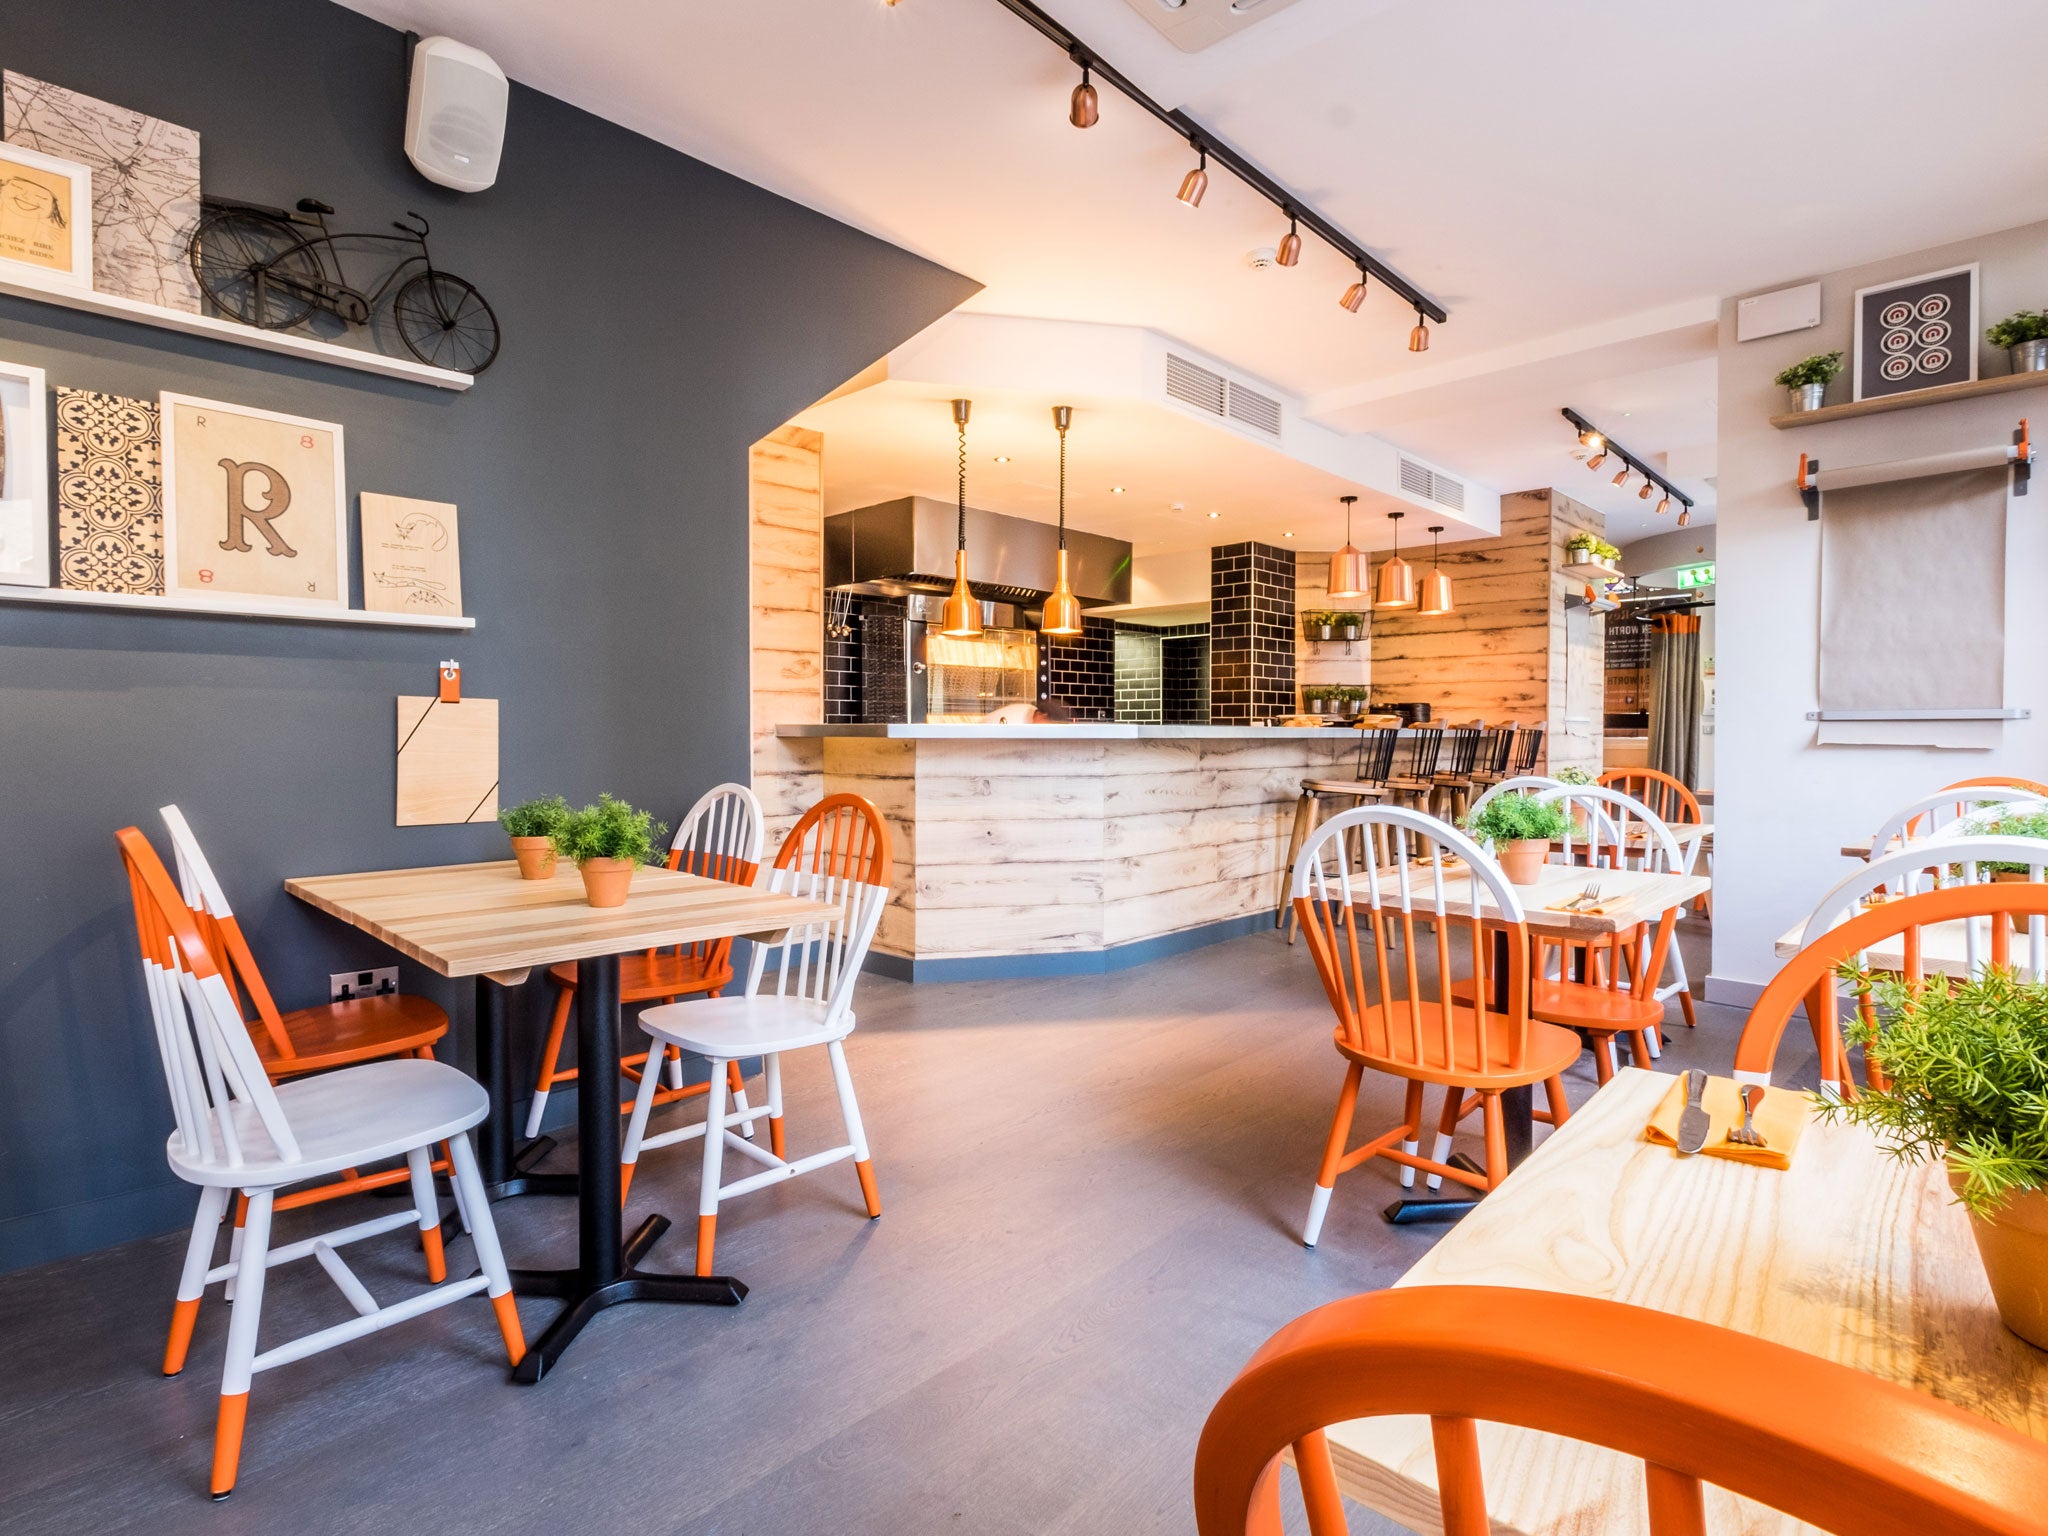 A derelict pub has been fitted out in bright, clean sort-of-Scandi style